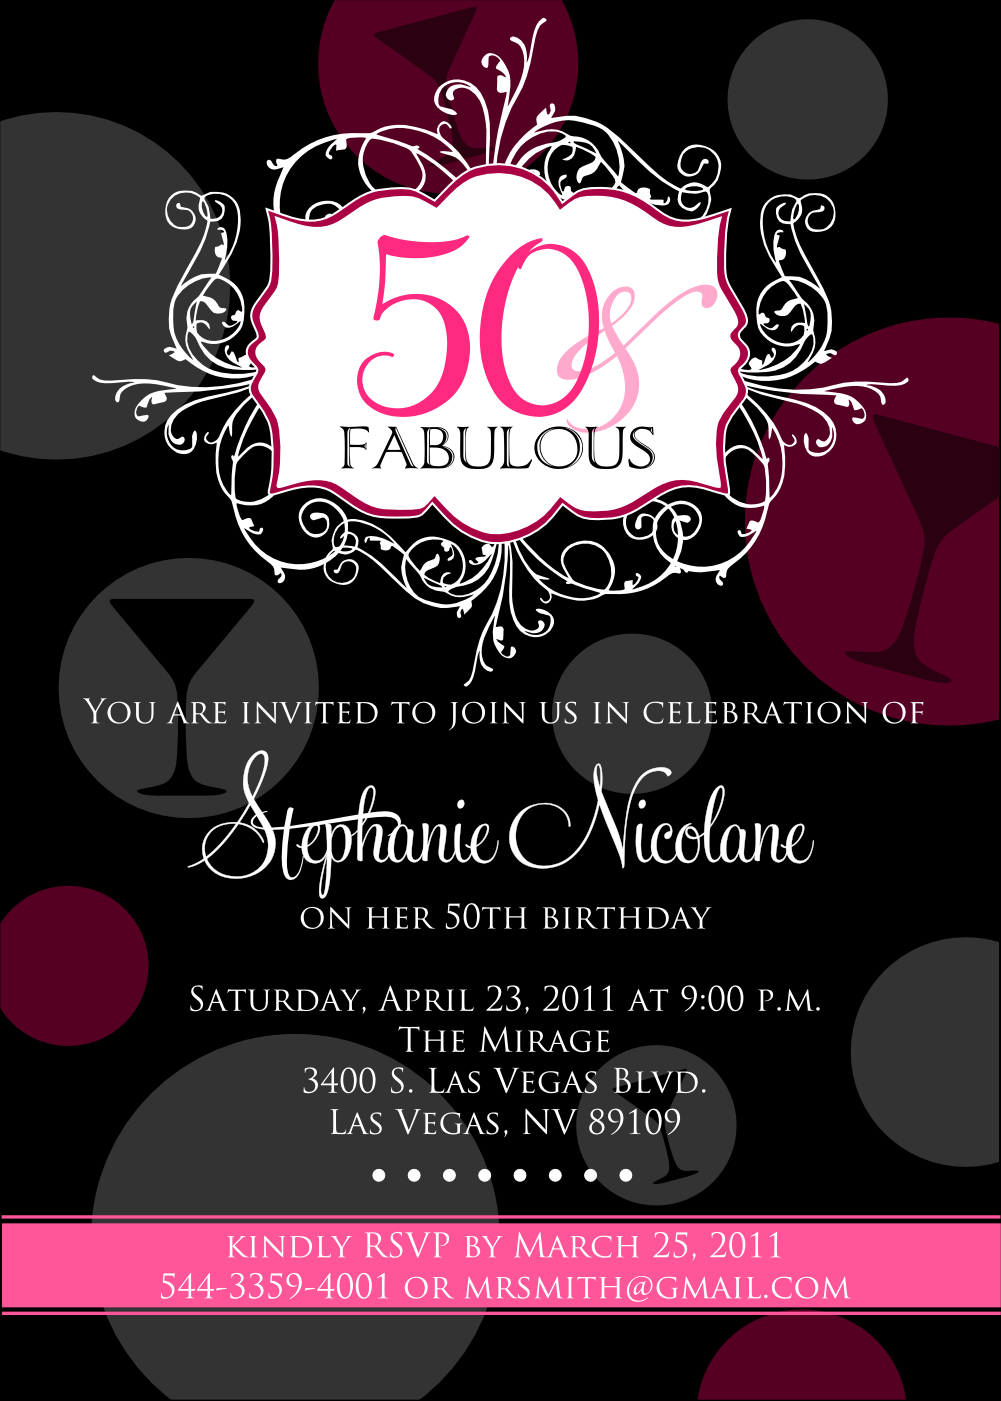 50th Birthday Party Invitations For Her